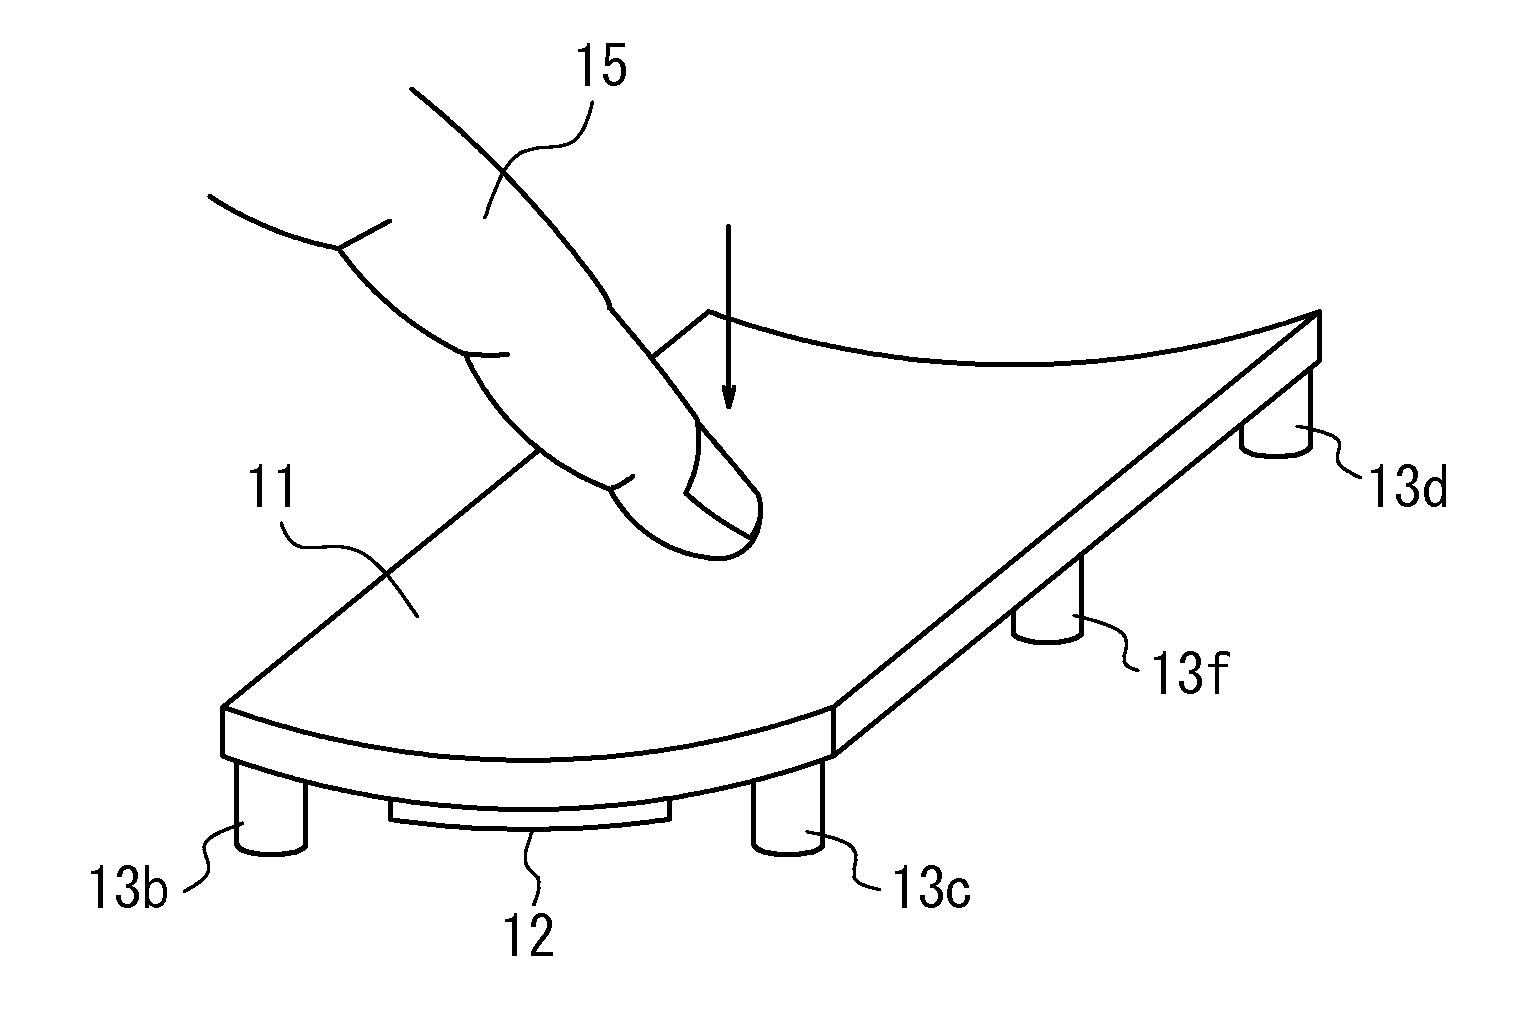 Touch panel apparatus